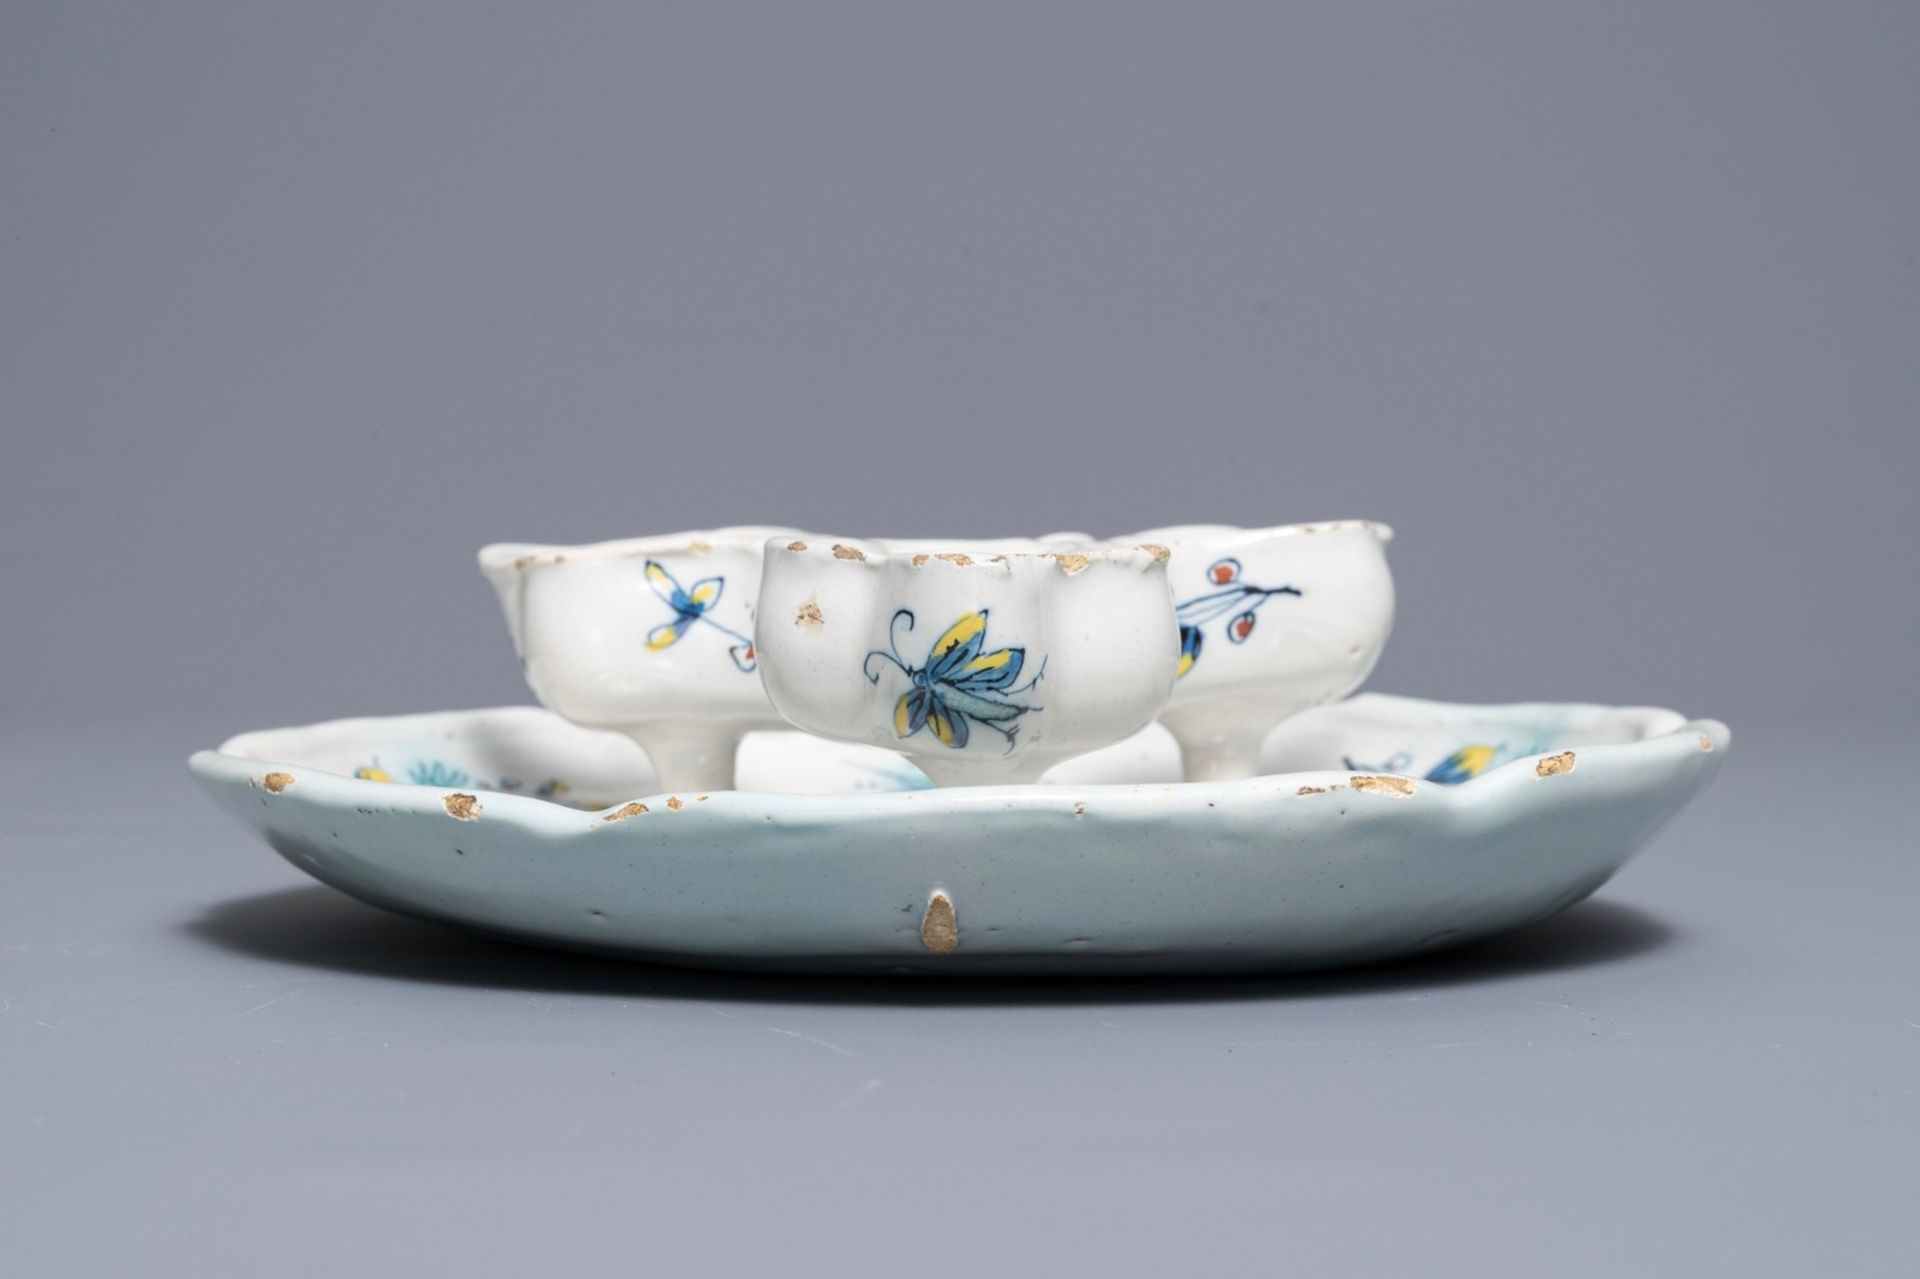 A Brussels faience spice dish with butterflies and flowers, 18th C. - Image 3 of 6